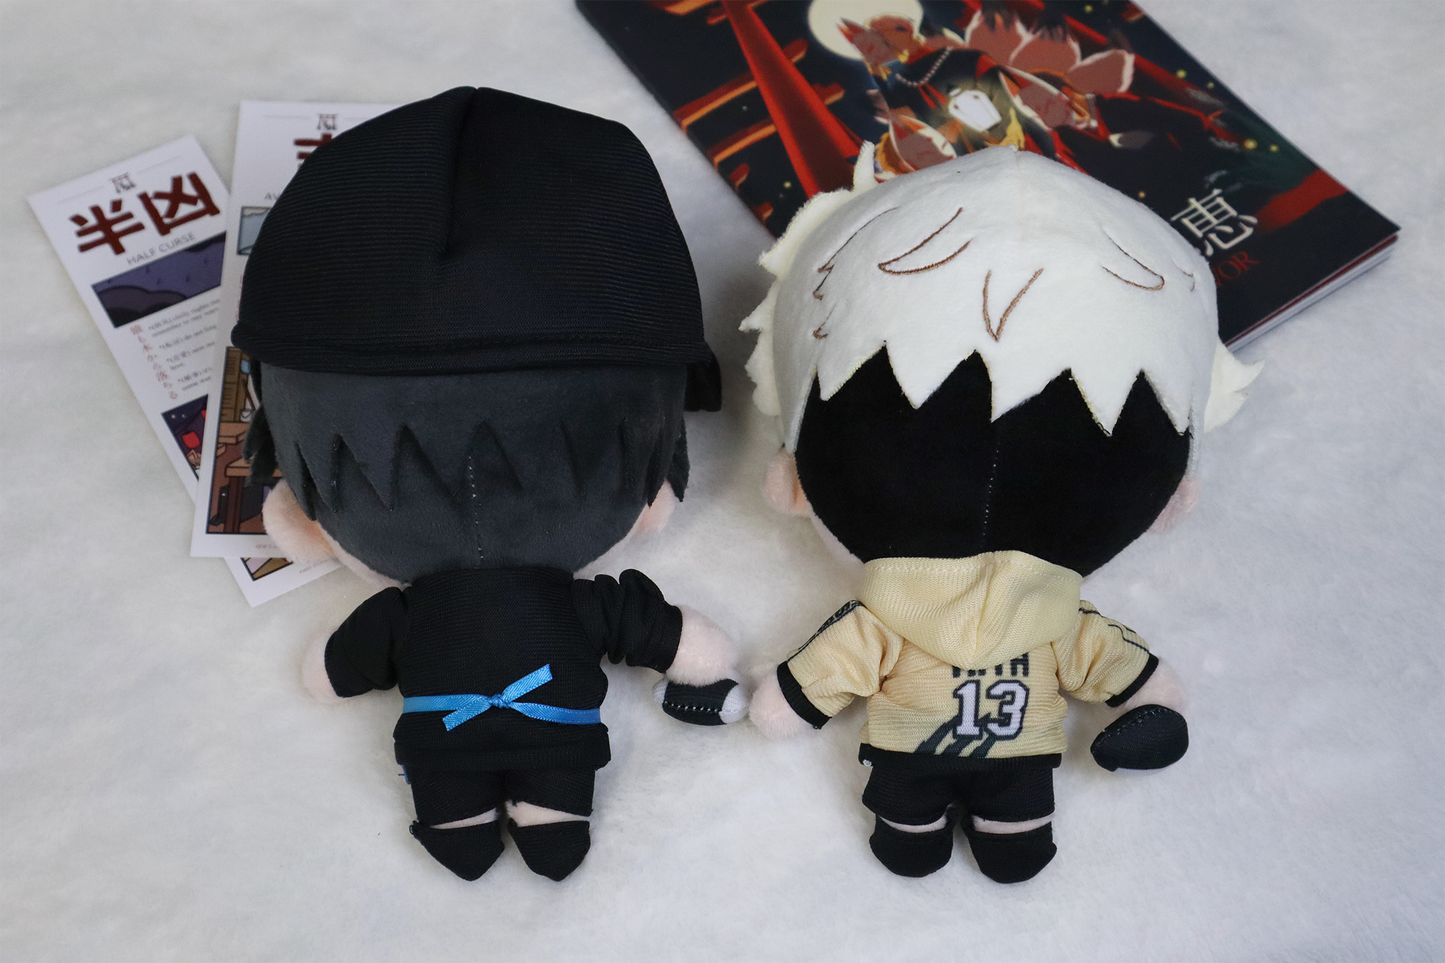 CLEARANCE Volleyball Twins Plush Dolls